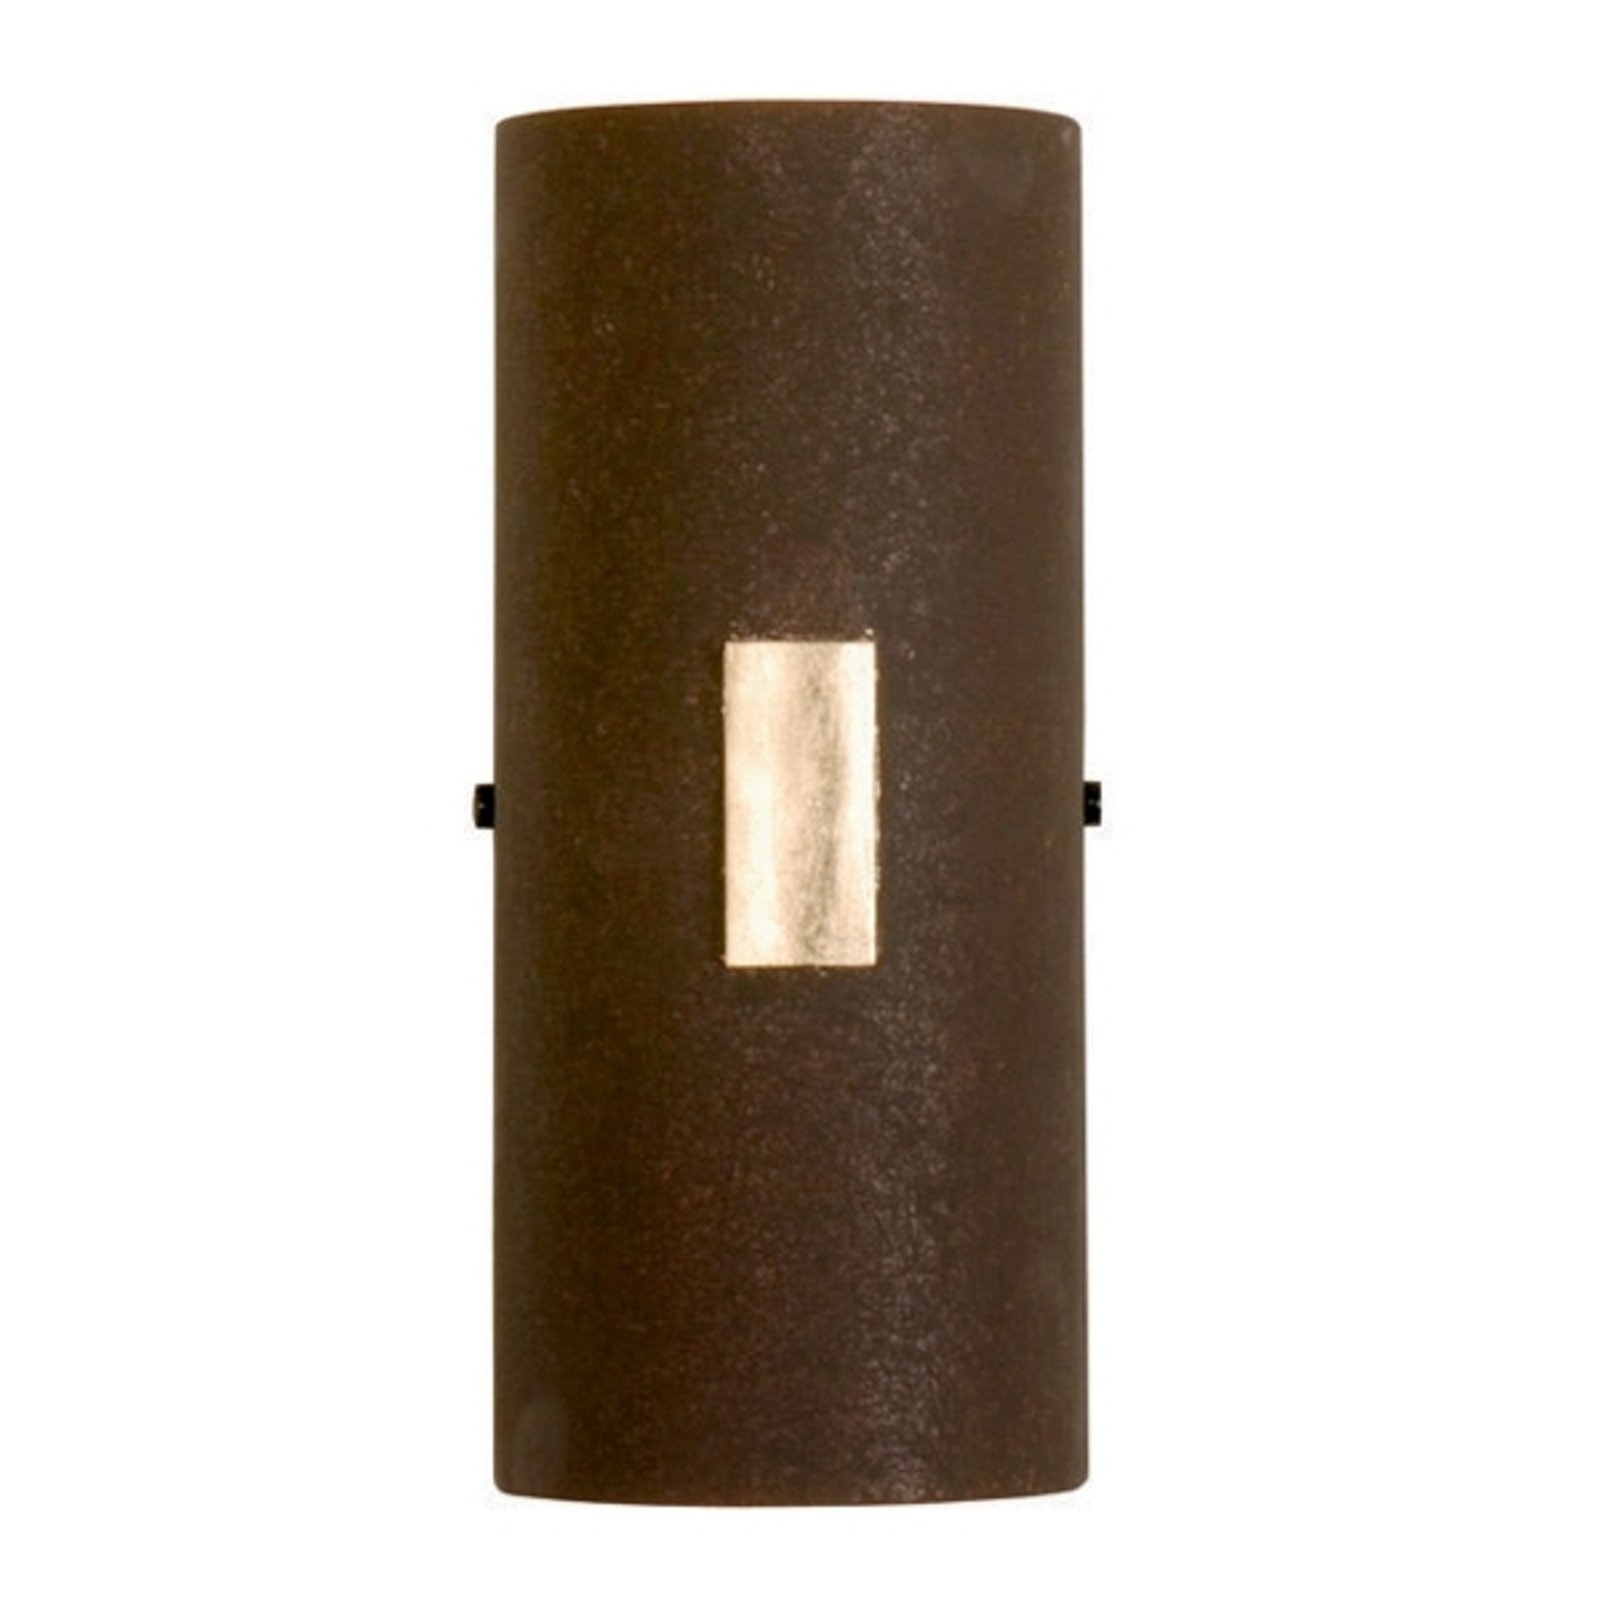 SOLO wall light in rust with gold leaf